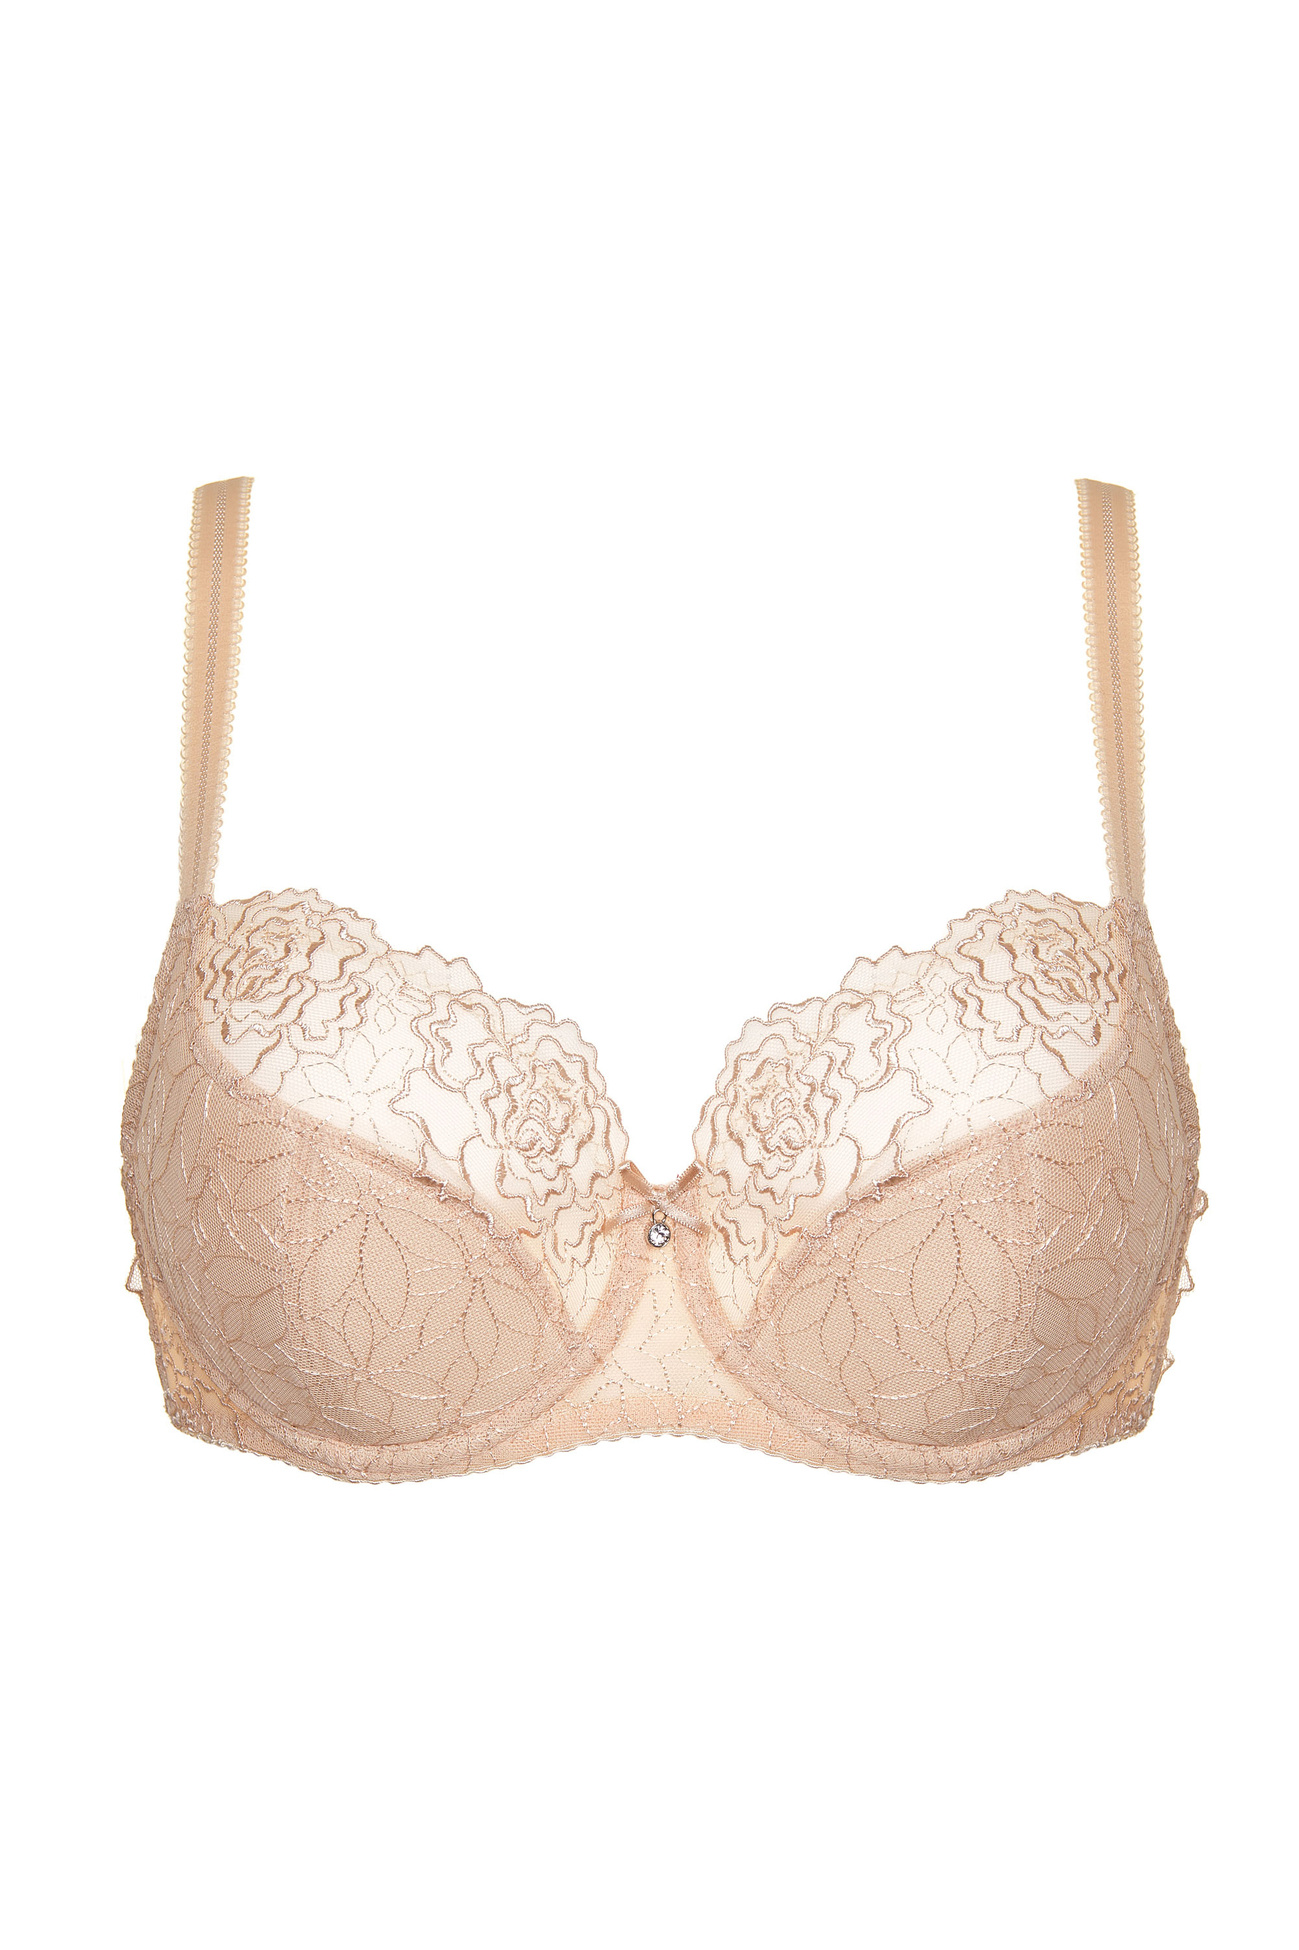 Pamela/B2 bra soft white Color as in the picture, Size 95C